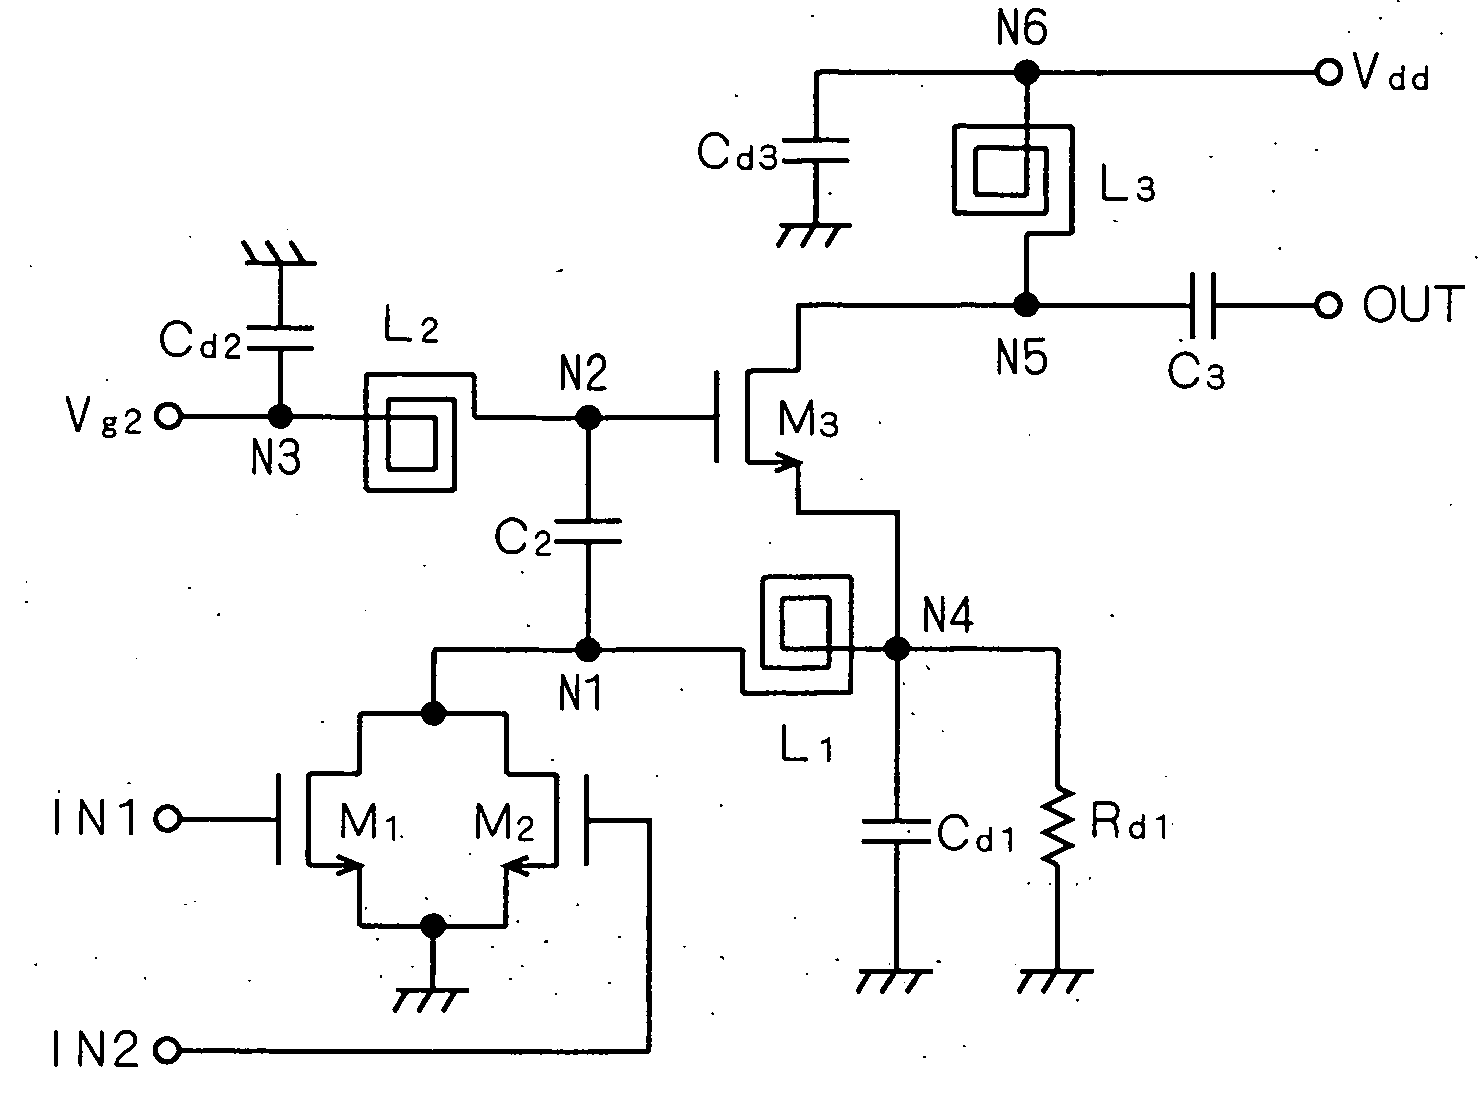 Current-reuse-type frequency multiplier